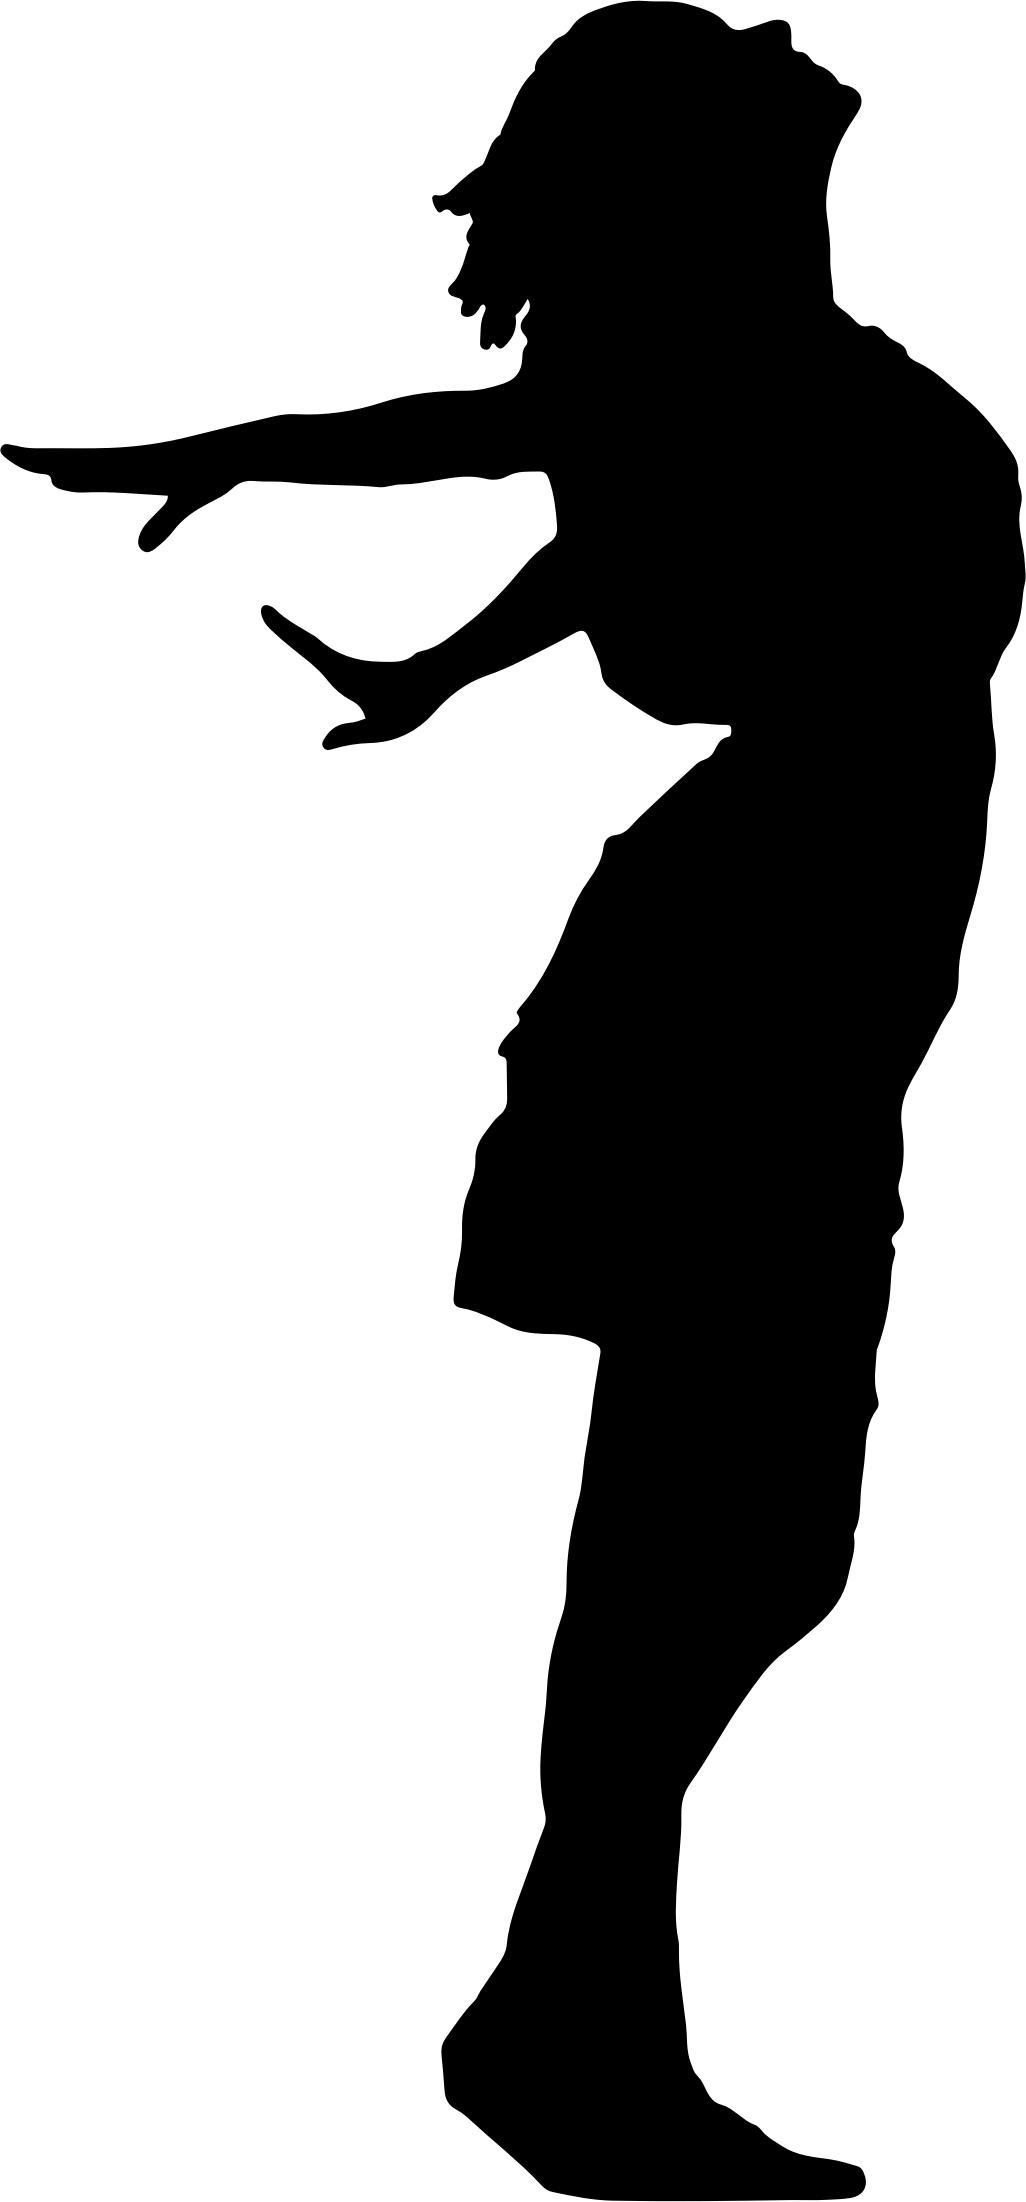 Woman With Arms Behind Silhouette png transparent